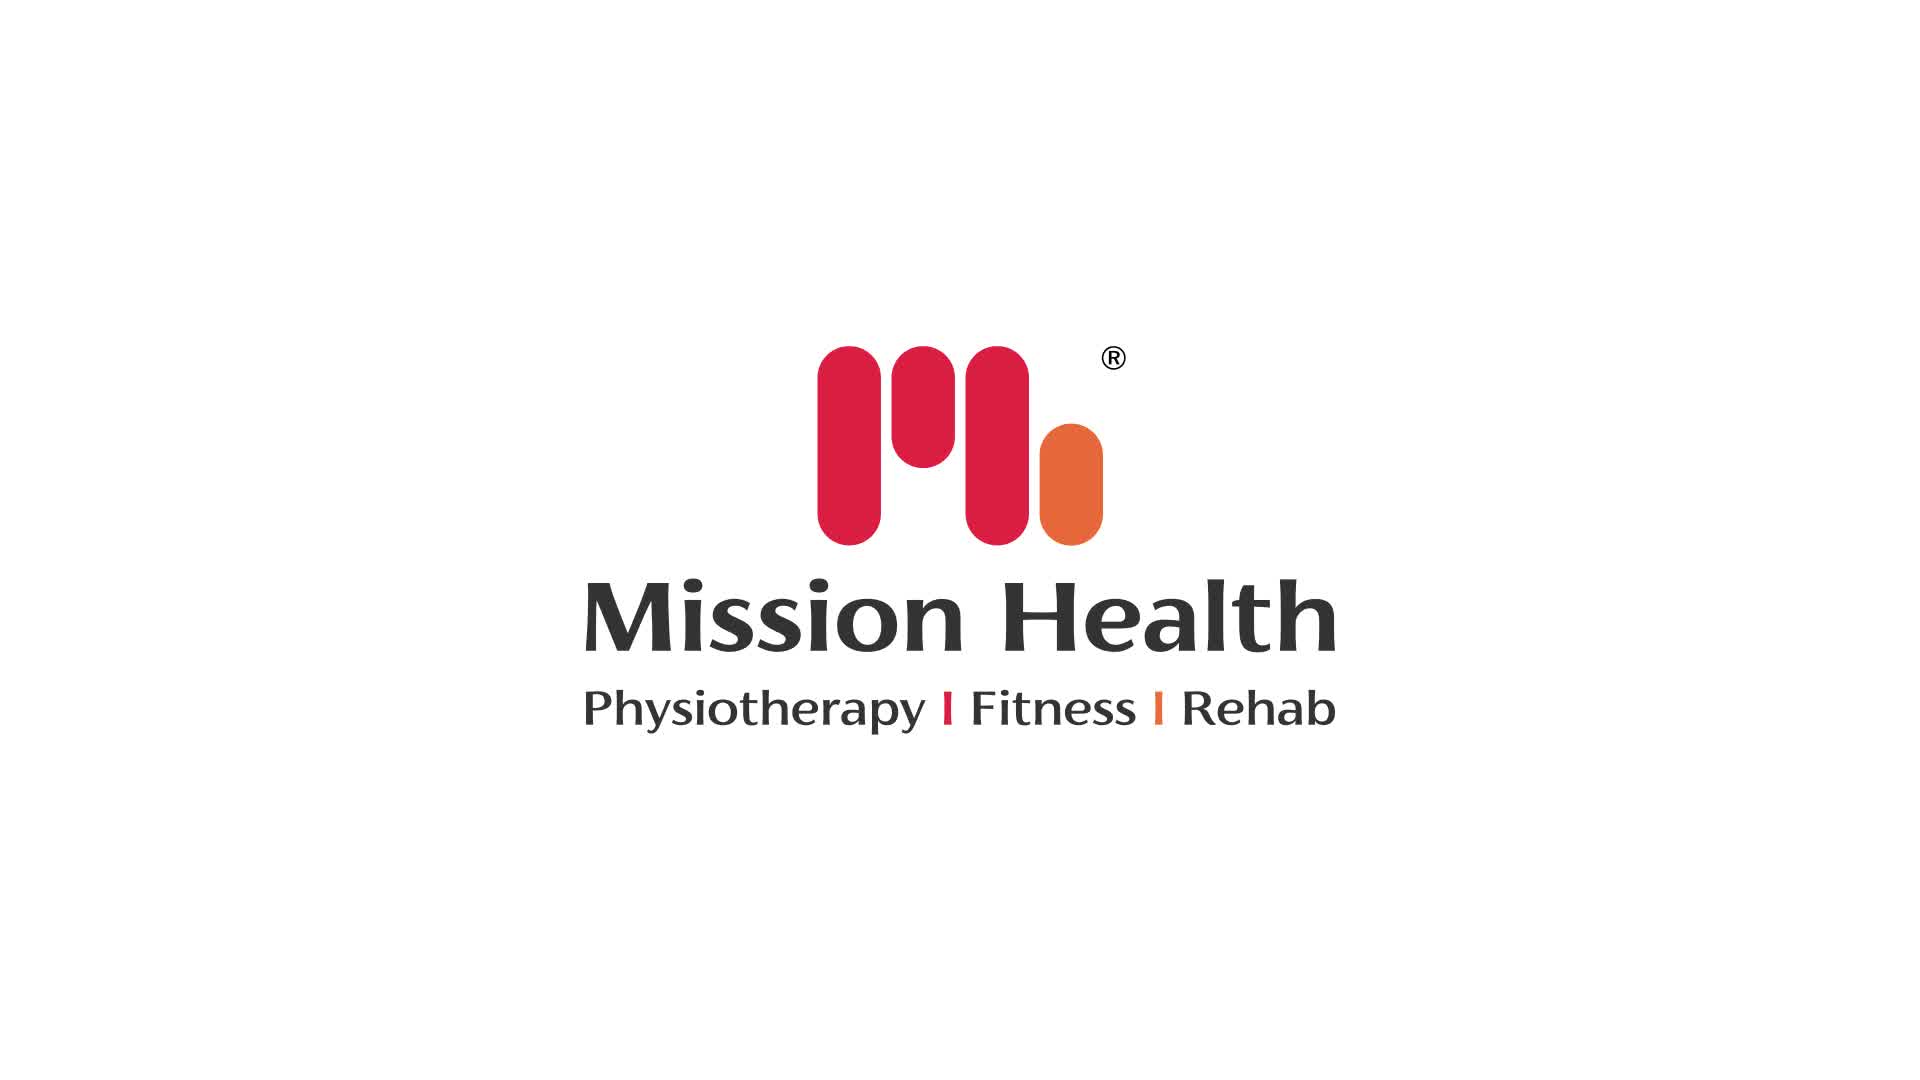 It's time to Restart!

Yes, get back to your workout sessions and re-build a Healthy & Fit Lifestyle that keeps you moving ahead.

Mission Health - Ahmedabad’s finest fitness boutique is all set to welcome you again from 5th August, under the expert supervision of our Sports & Fitness Physiotherapists. Be rest assured about sanitation and safety.

Call: +916356463564
Visit: www.missionhealth.co.in

#RestartRoutine #exercise #exercises #fitnessexperts #fitnessexpert #fitnessteam #gymoholic #fitness #MissionHealth #MissionHealthIndia #MovementIsLife